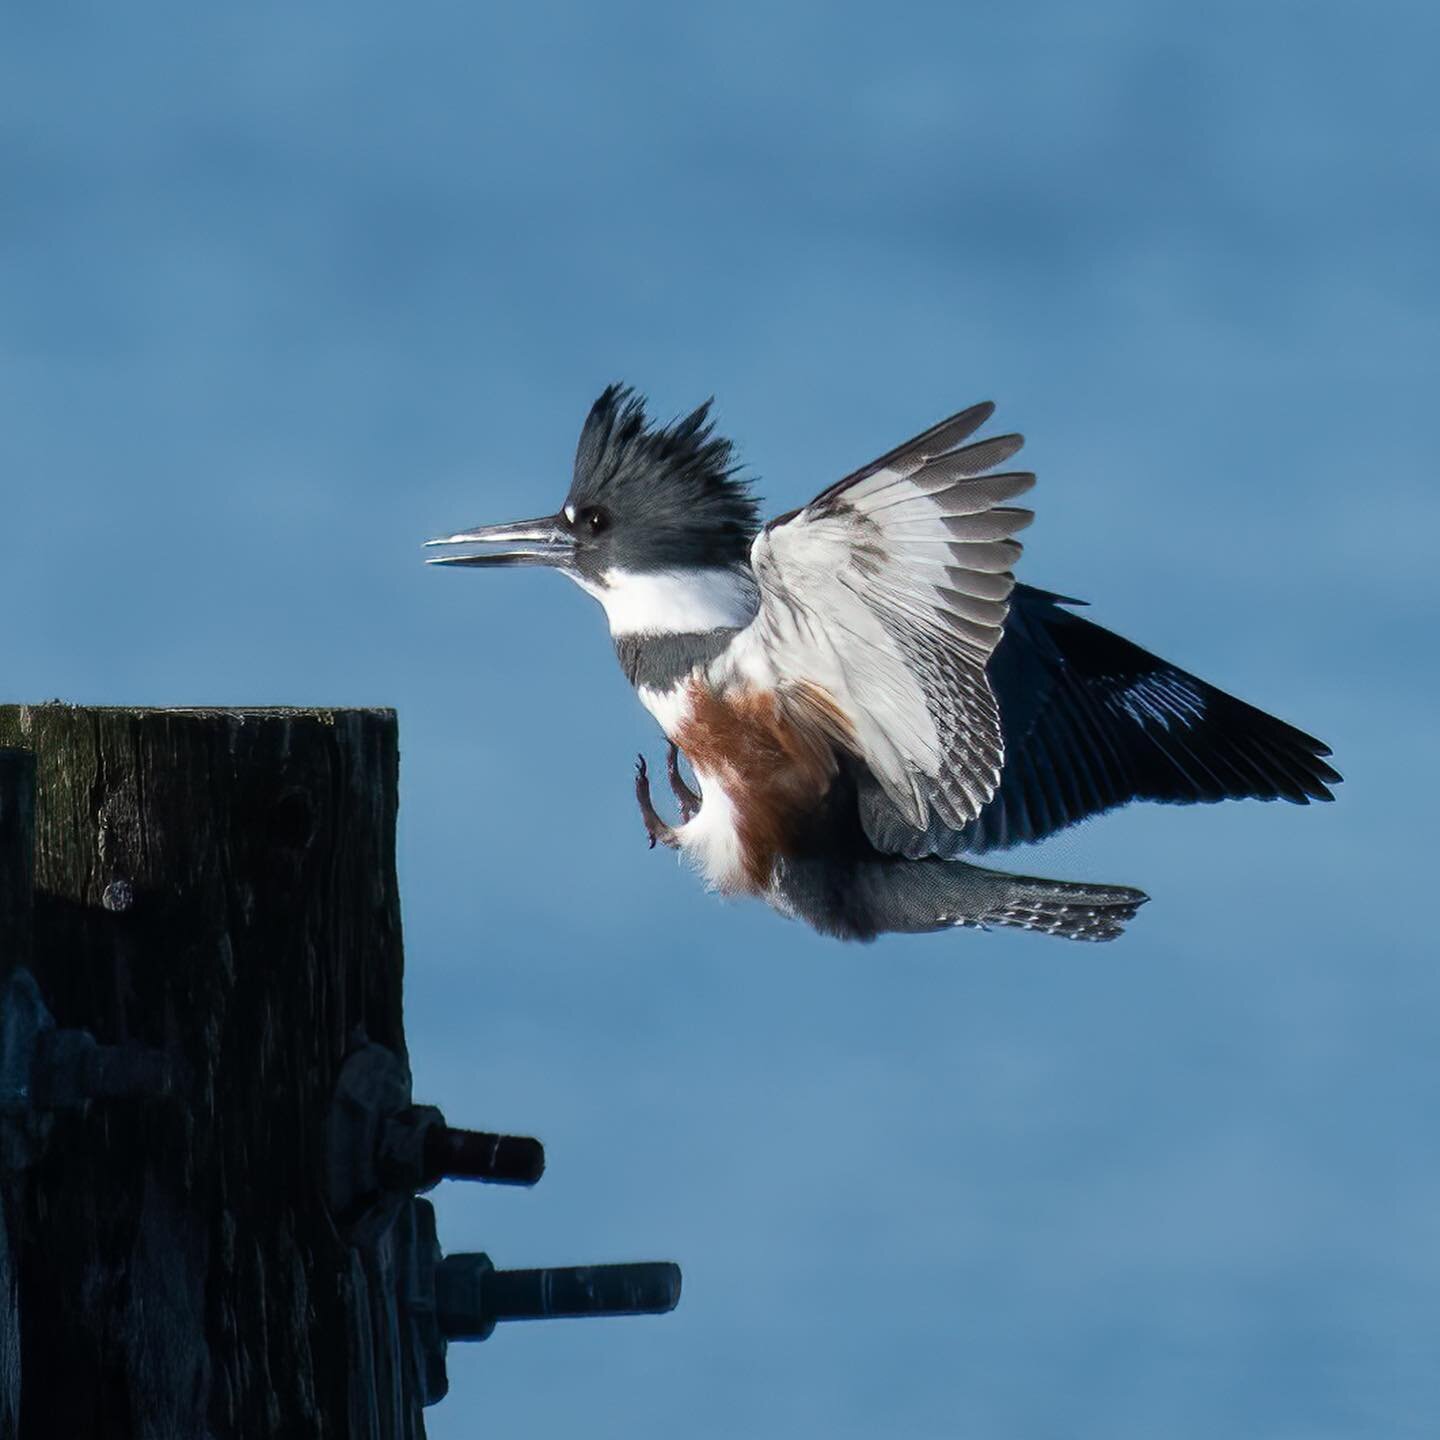 Had fun playing with a pair of belted kingfishers today...
#pnwphotographer #pnwwonderland #porttownsendwashington #kingfisher #beltedkingfisher #naturephotography